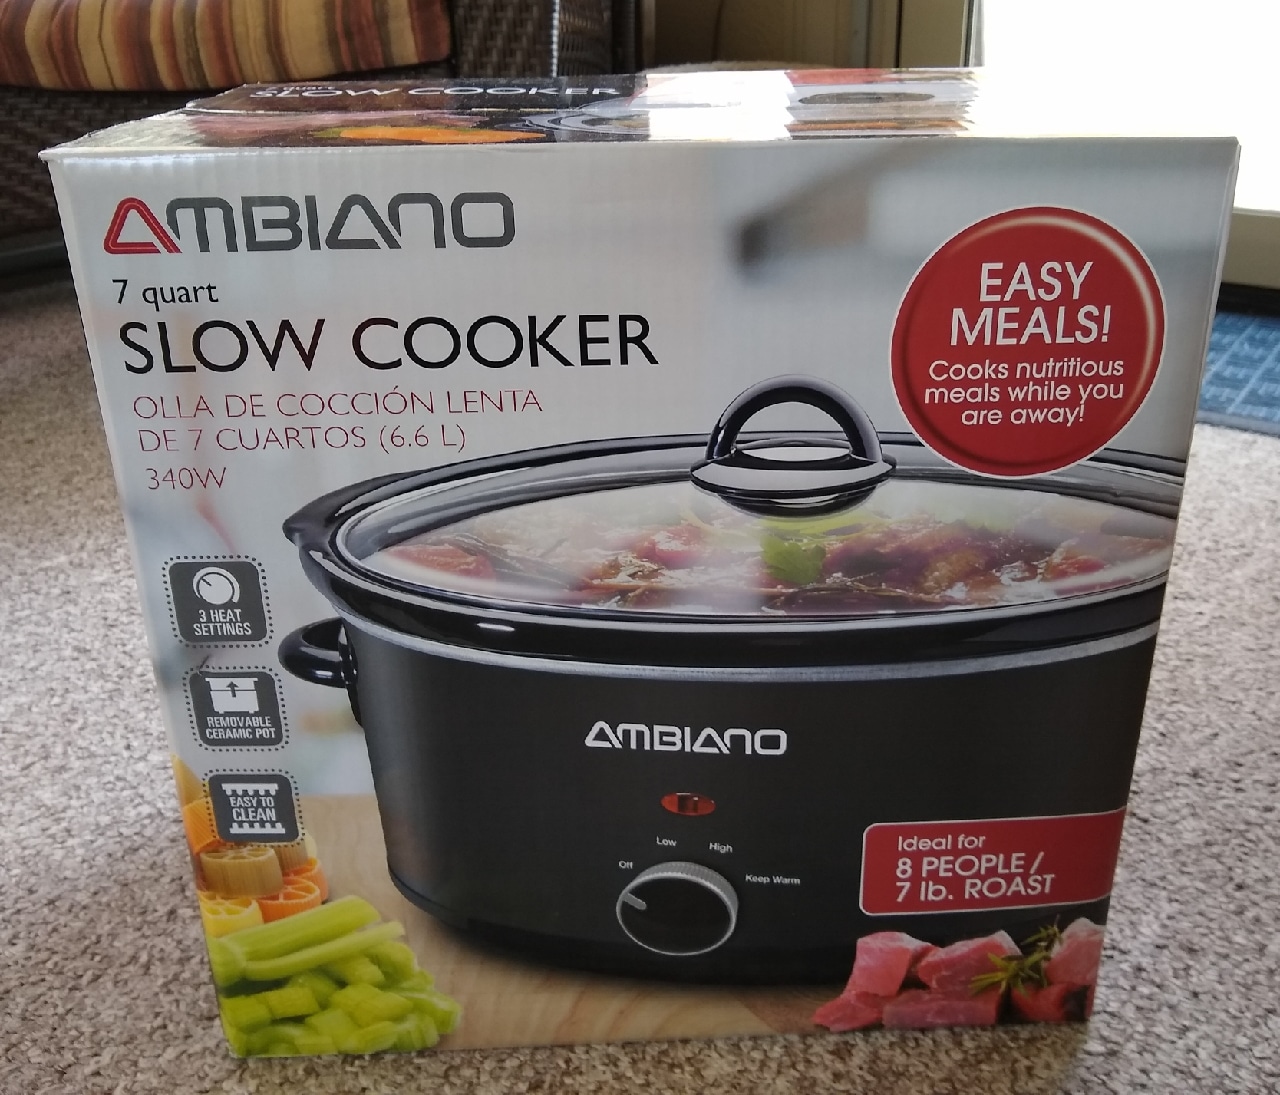 Ambiano 7 Quart Slow Cooker | ALDI REVIEWER